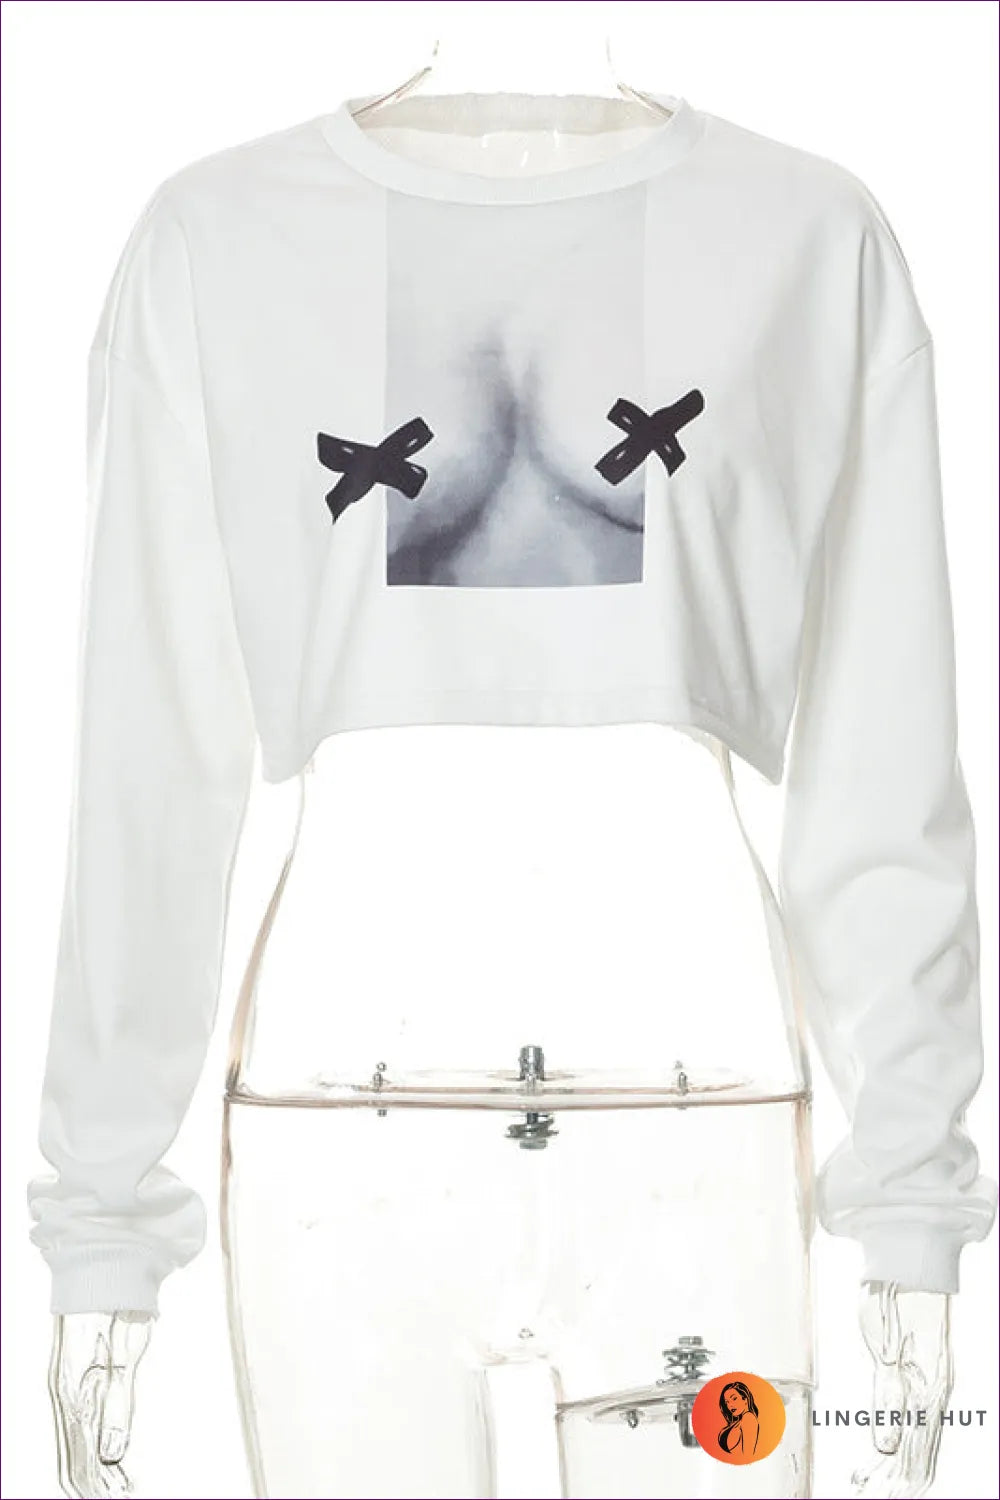 This Stylish Printed Long Sleeve Crop Top Is Perfect For a Night Out Or Can Be Dressed Down And Worn Casually.